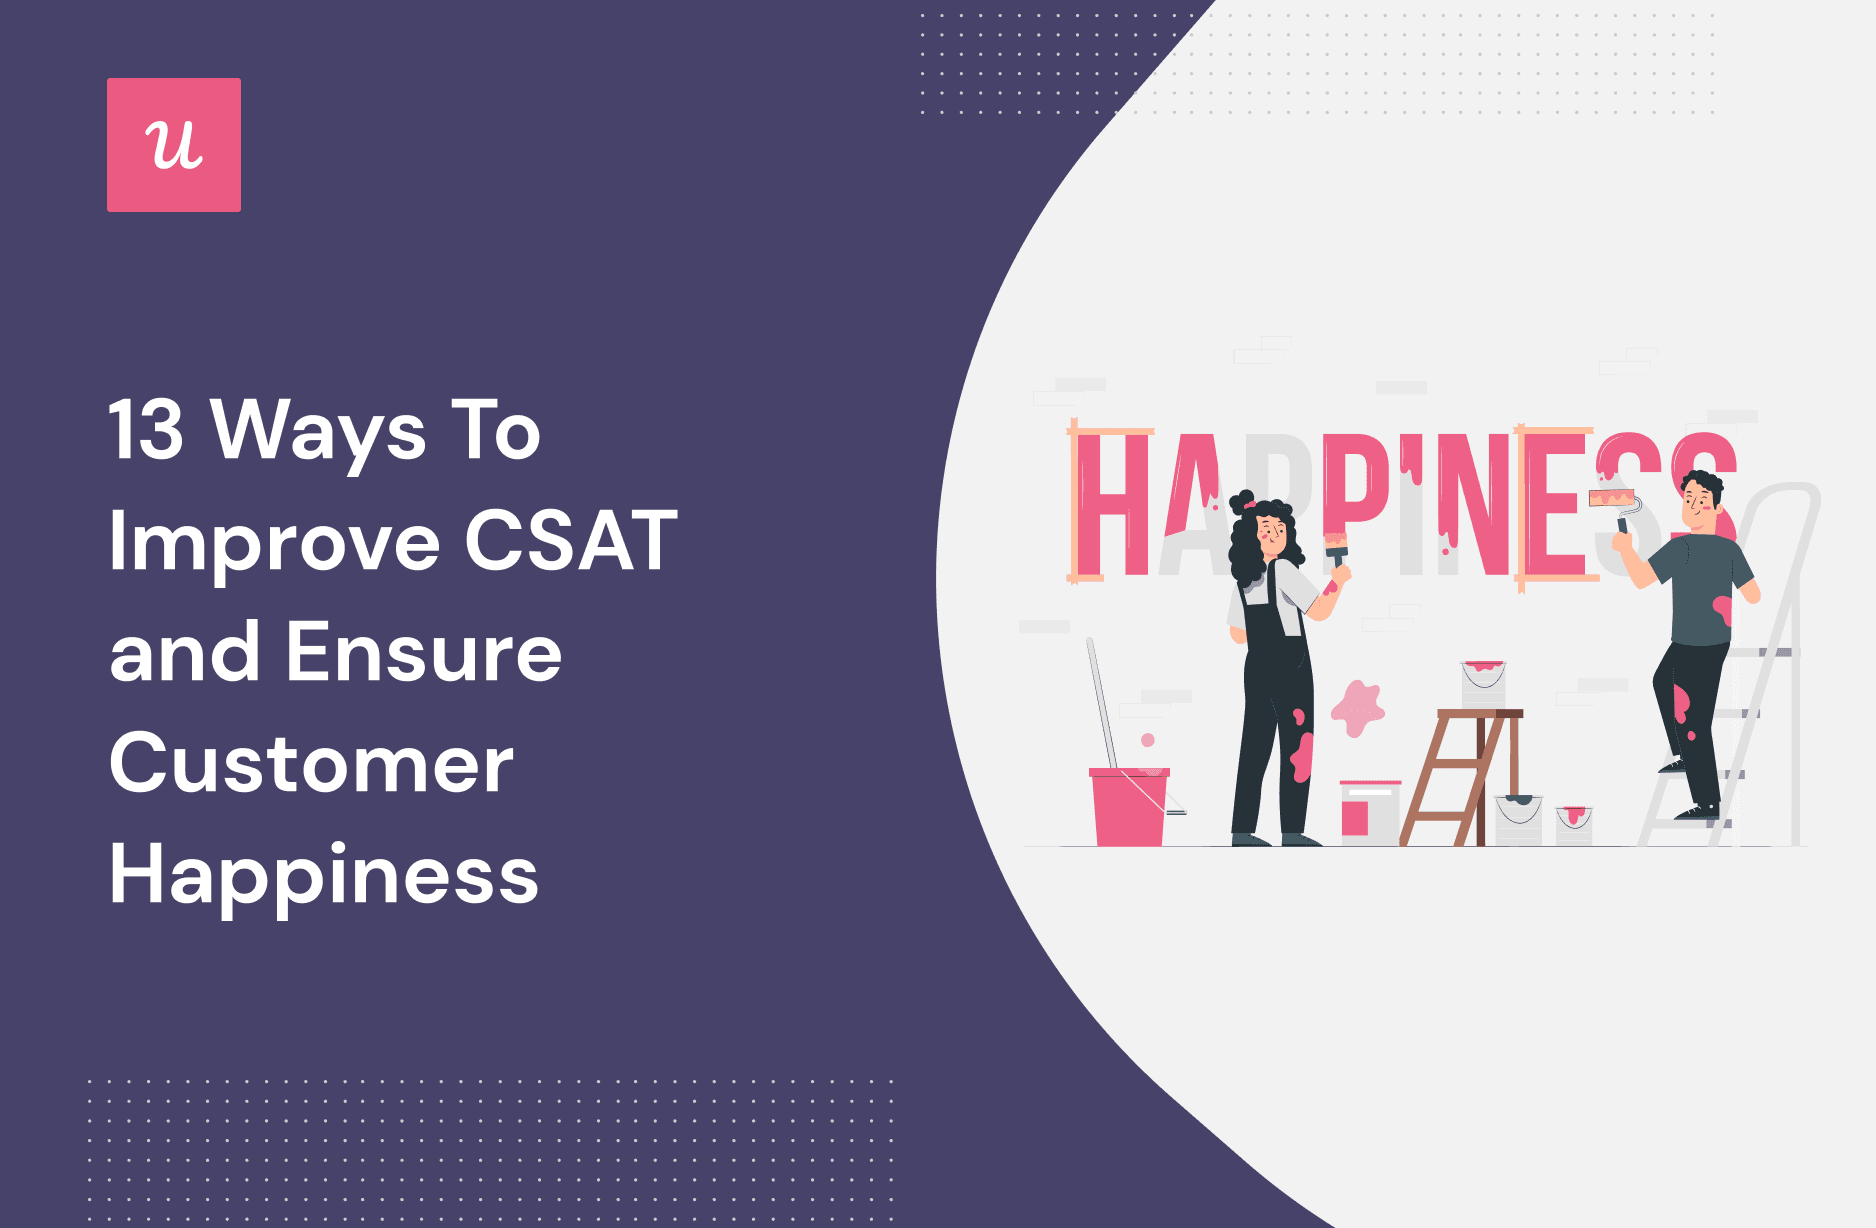 13 Ways to Improve CSAT and Ensure Customer Happiness cover